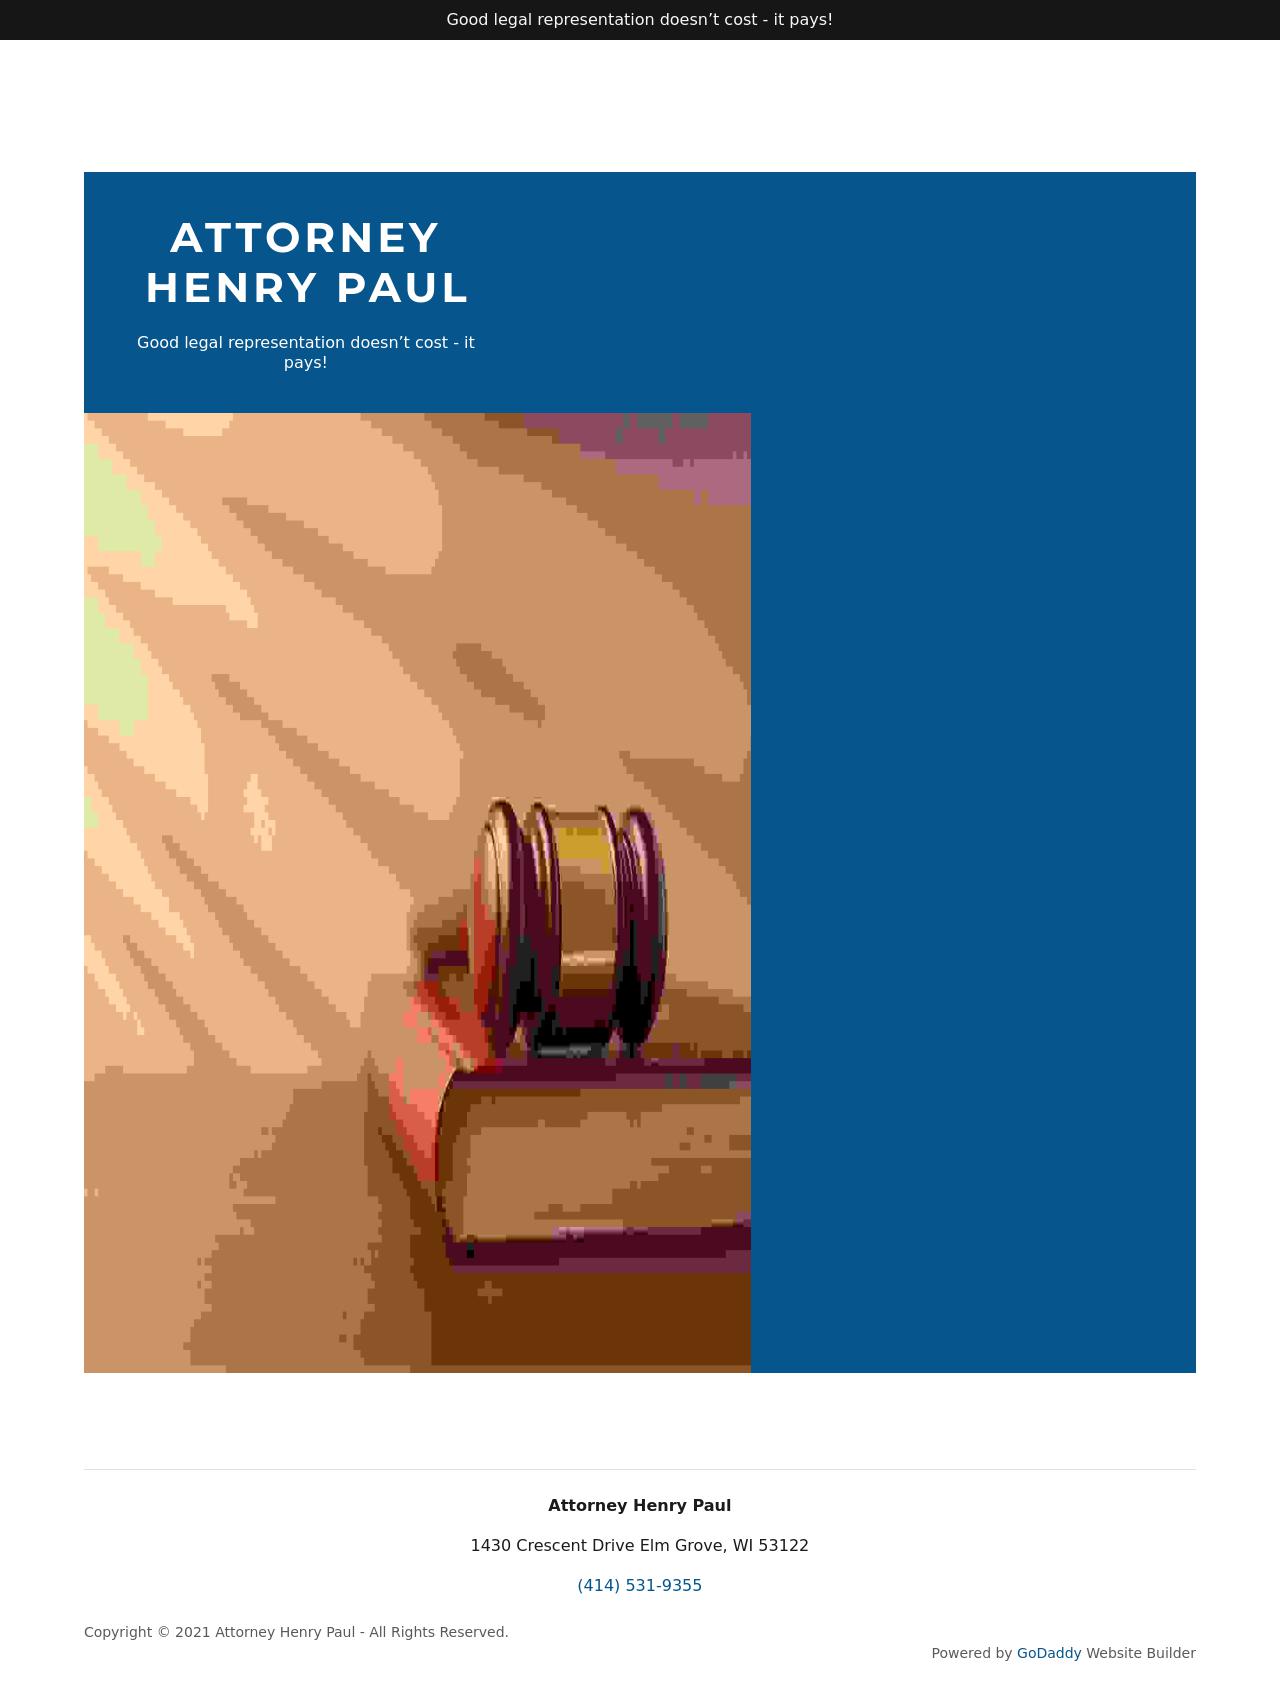 Henry Paul Attorney at Law - Wauwatosa WI Lawyers